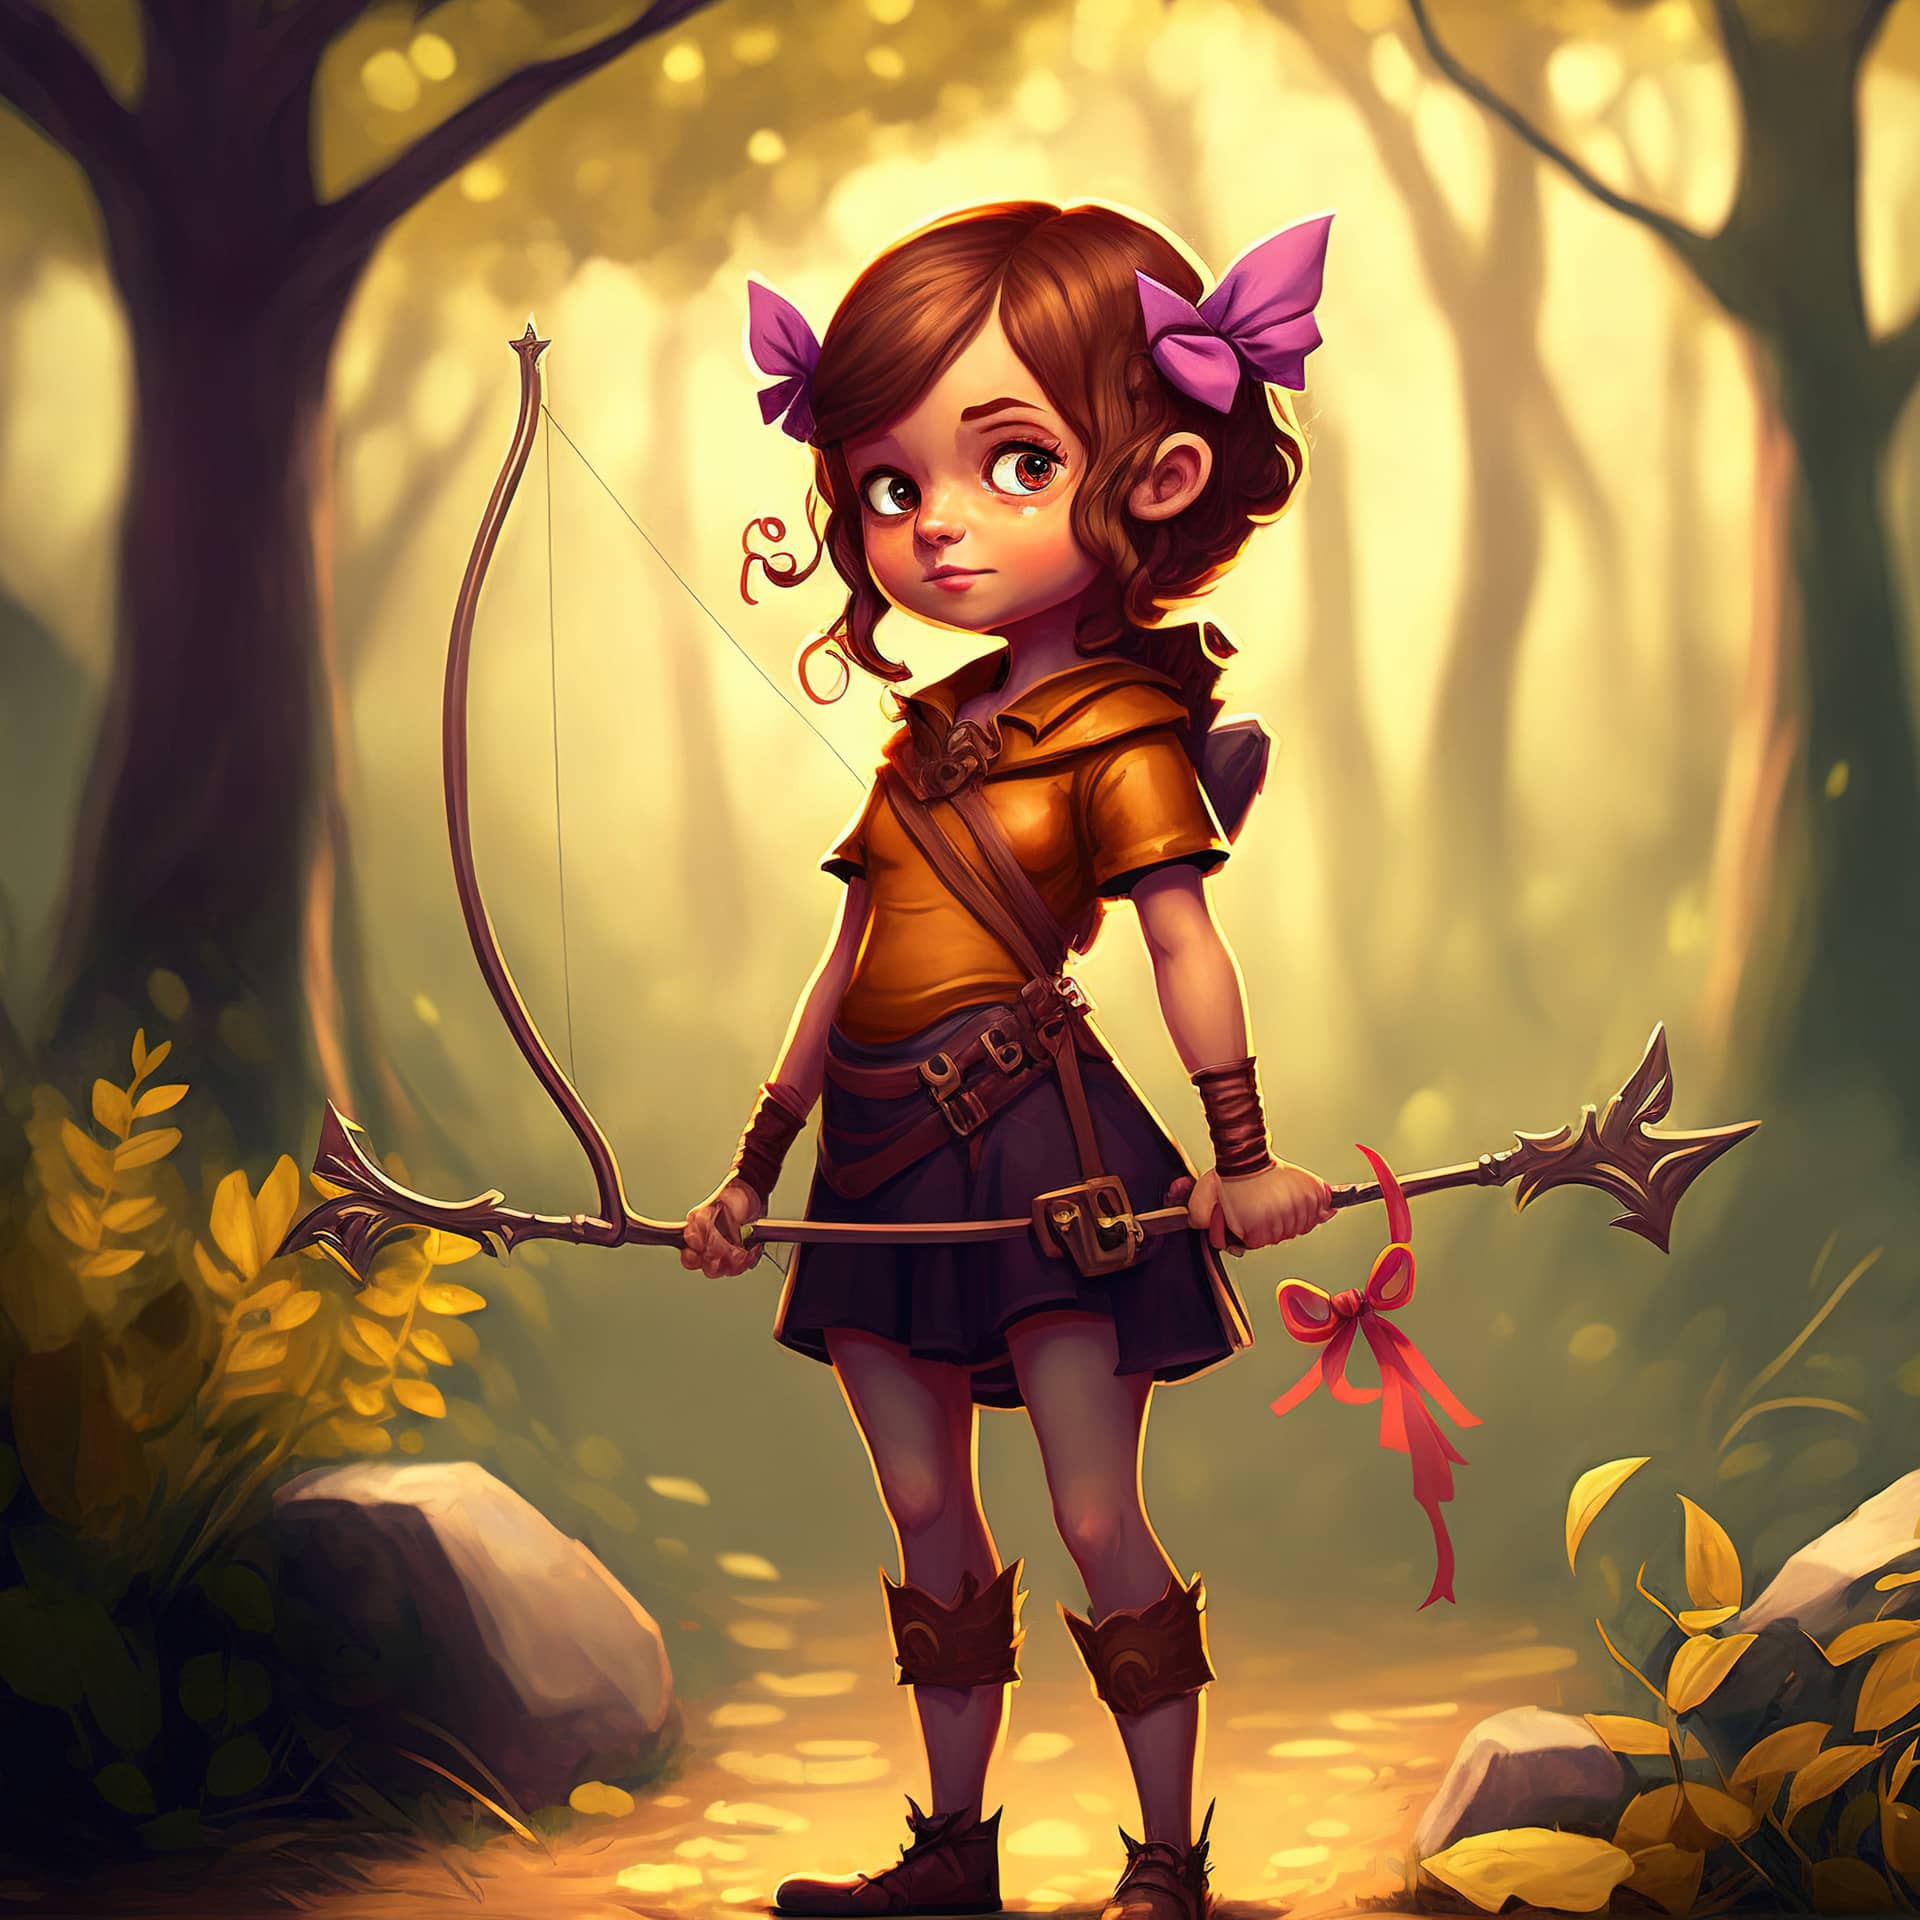 Character with weapon hands digital art style illustration painting image